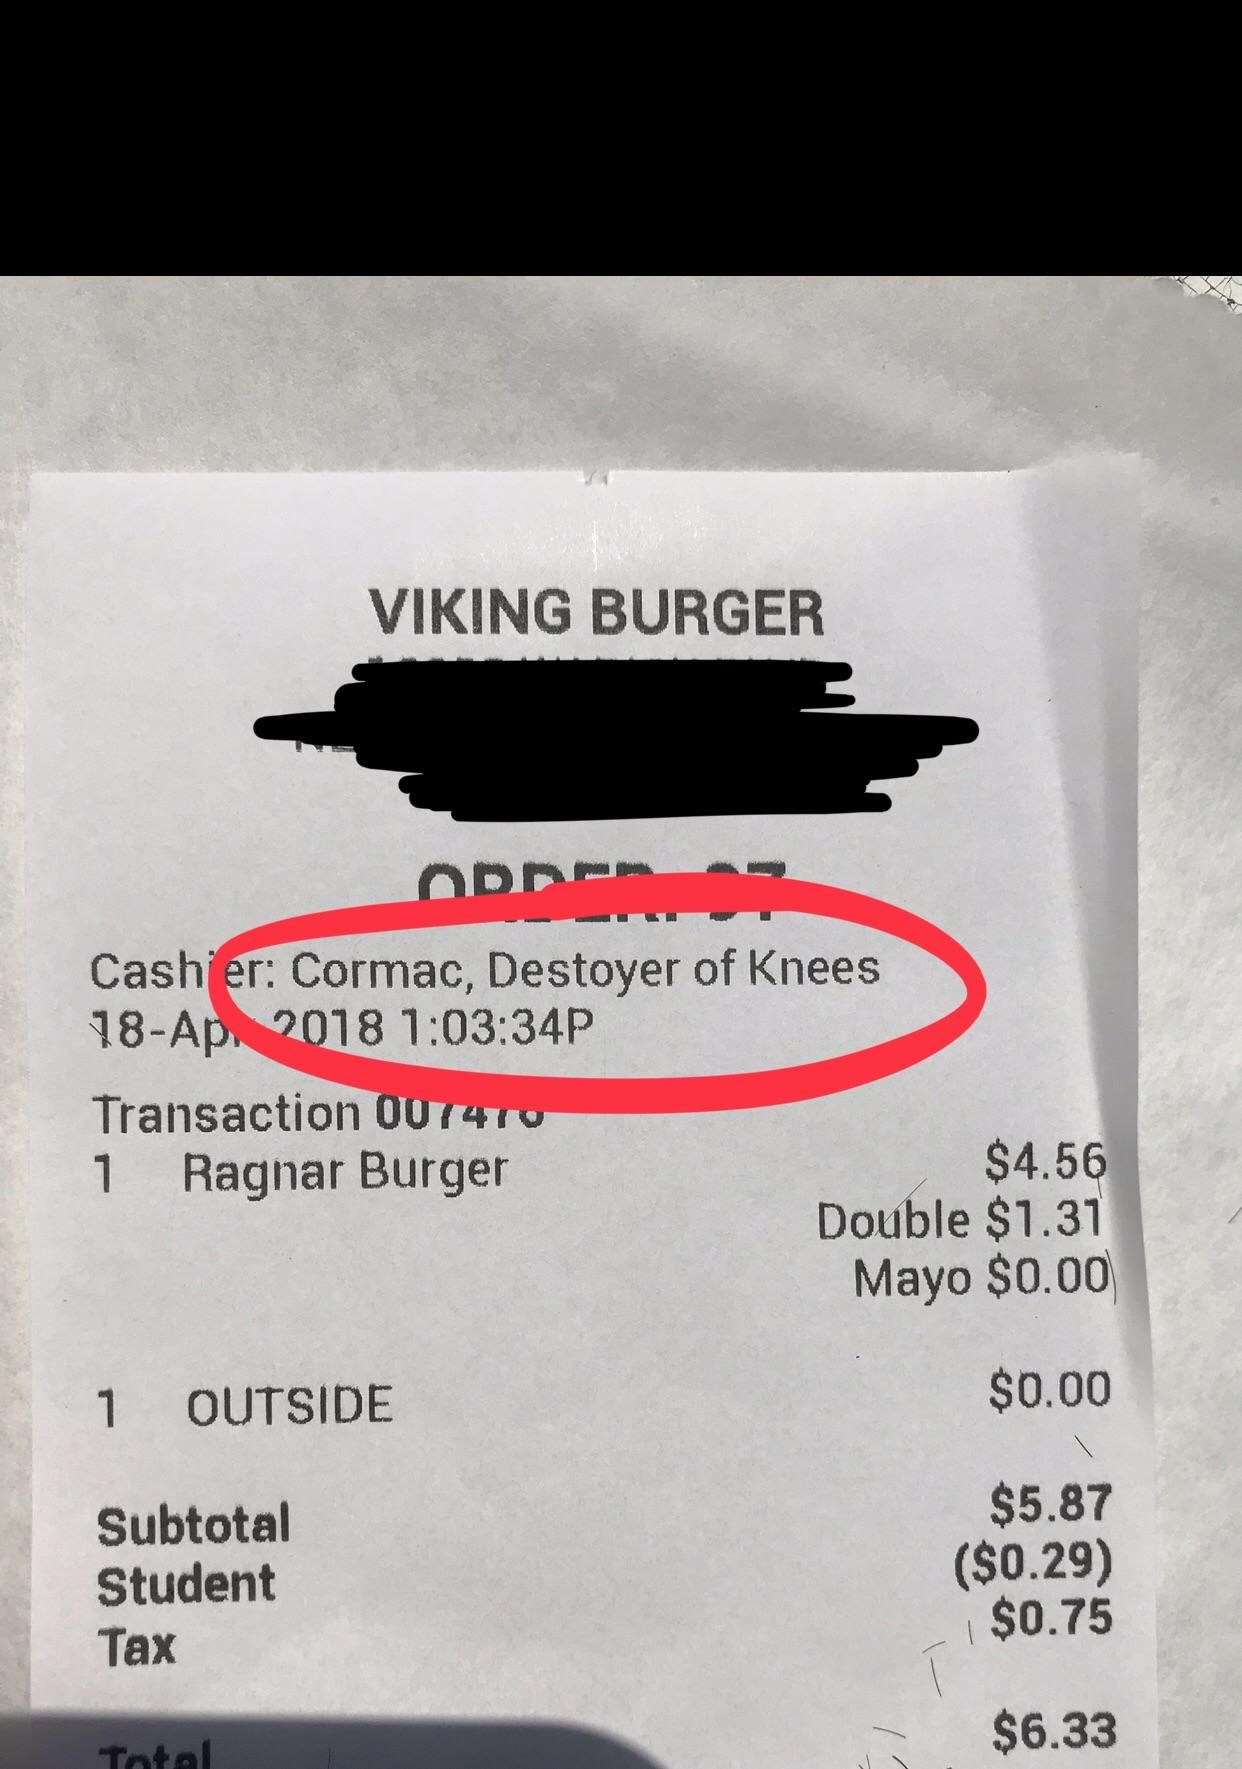 Local burger joint employees have titles like Vikings would